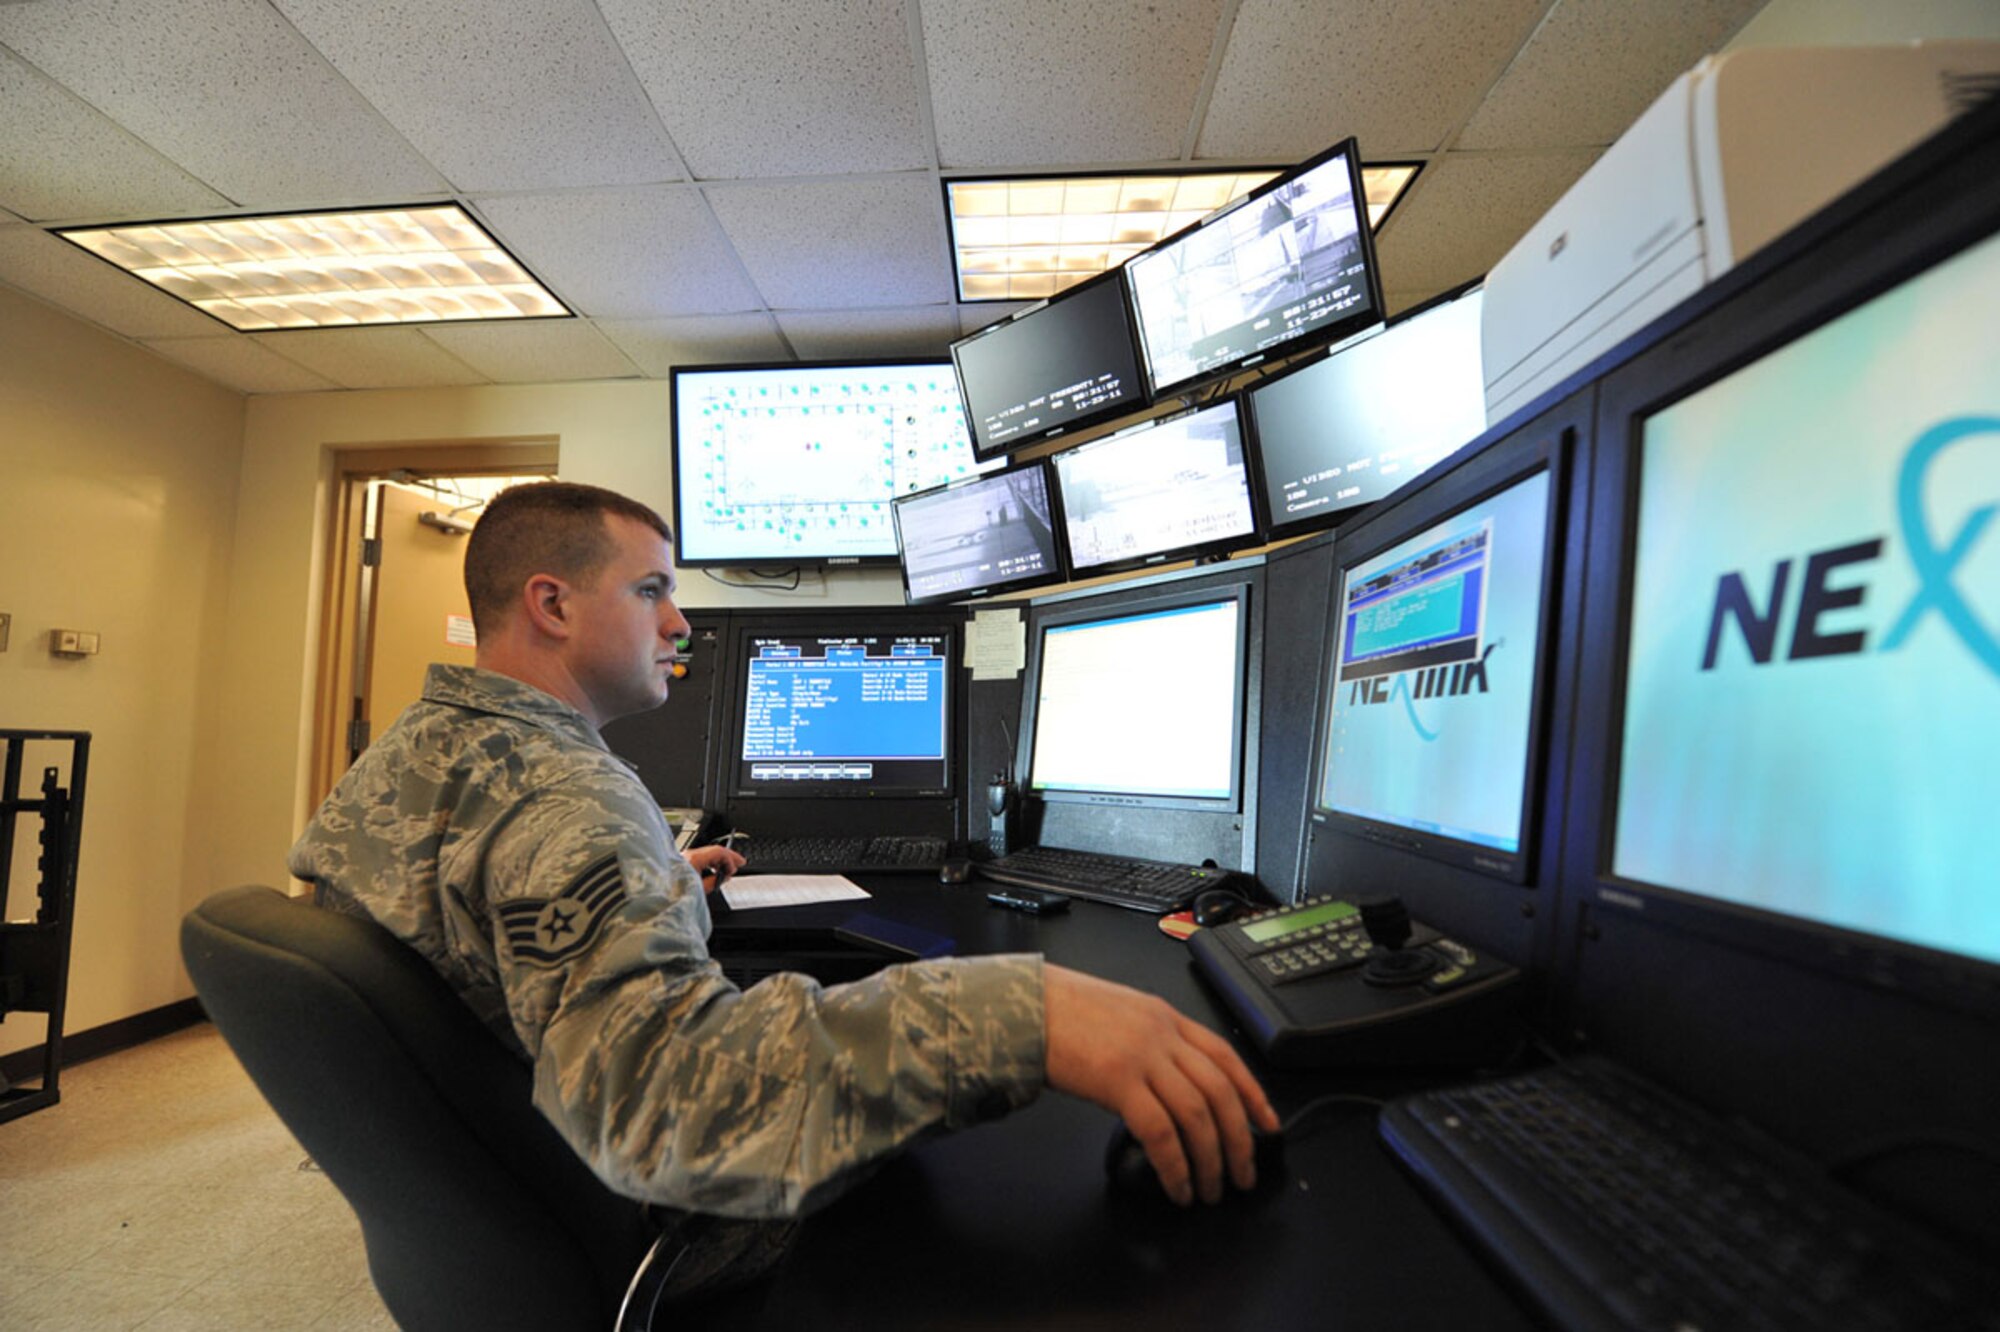 ROBINS AIR FORCE BASE, Ga. - Staff Sgt. Kyle Crook, 78th Security Forces Squadron, monitors the Command, Control and Display Equipment components of the Robins AFB Intrusion Detection System, a program recently completed by Electronic Systems Center's Force Protection Office. The operator can monitor all activity in the detection area and initiate a response force if needed.  (Courtesy Photo) 